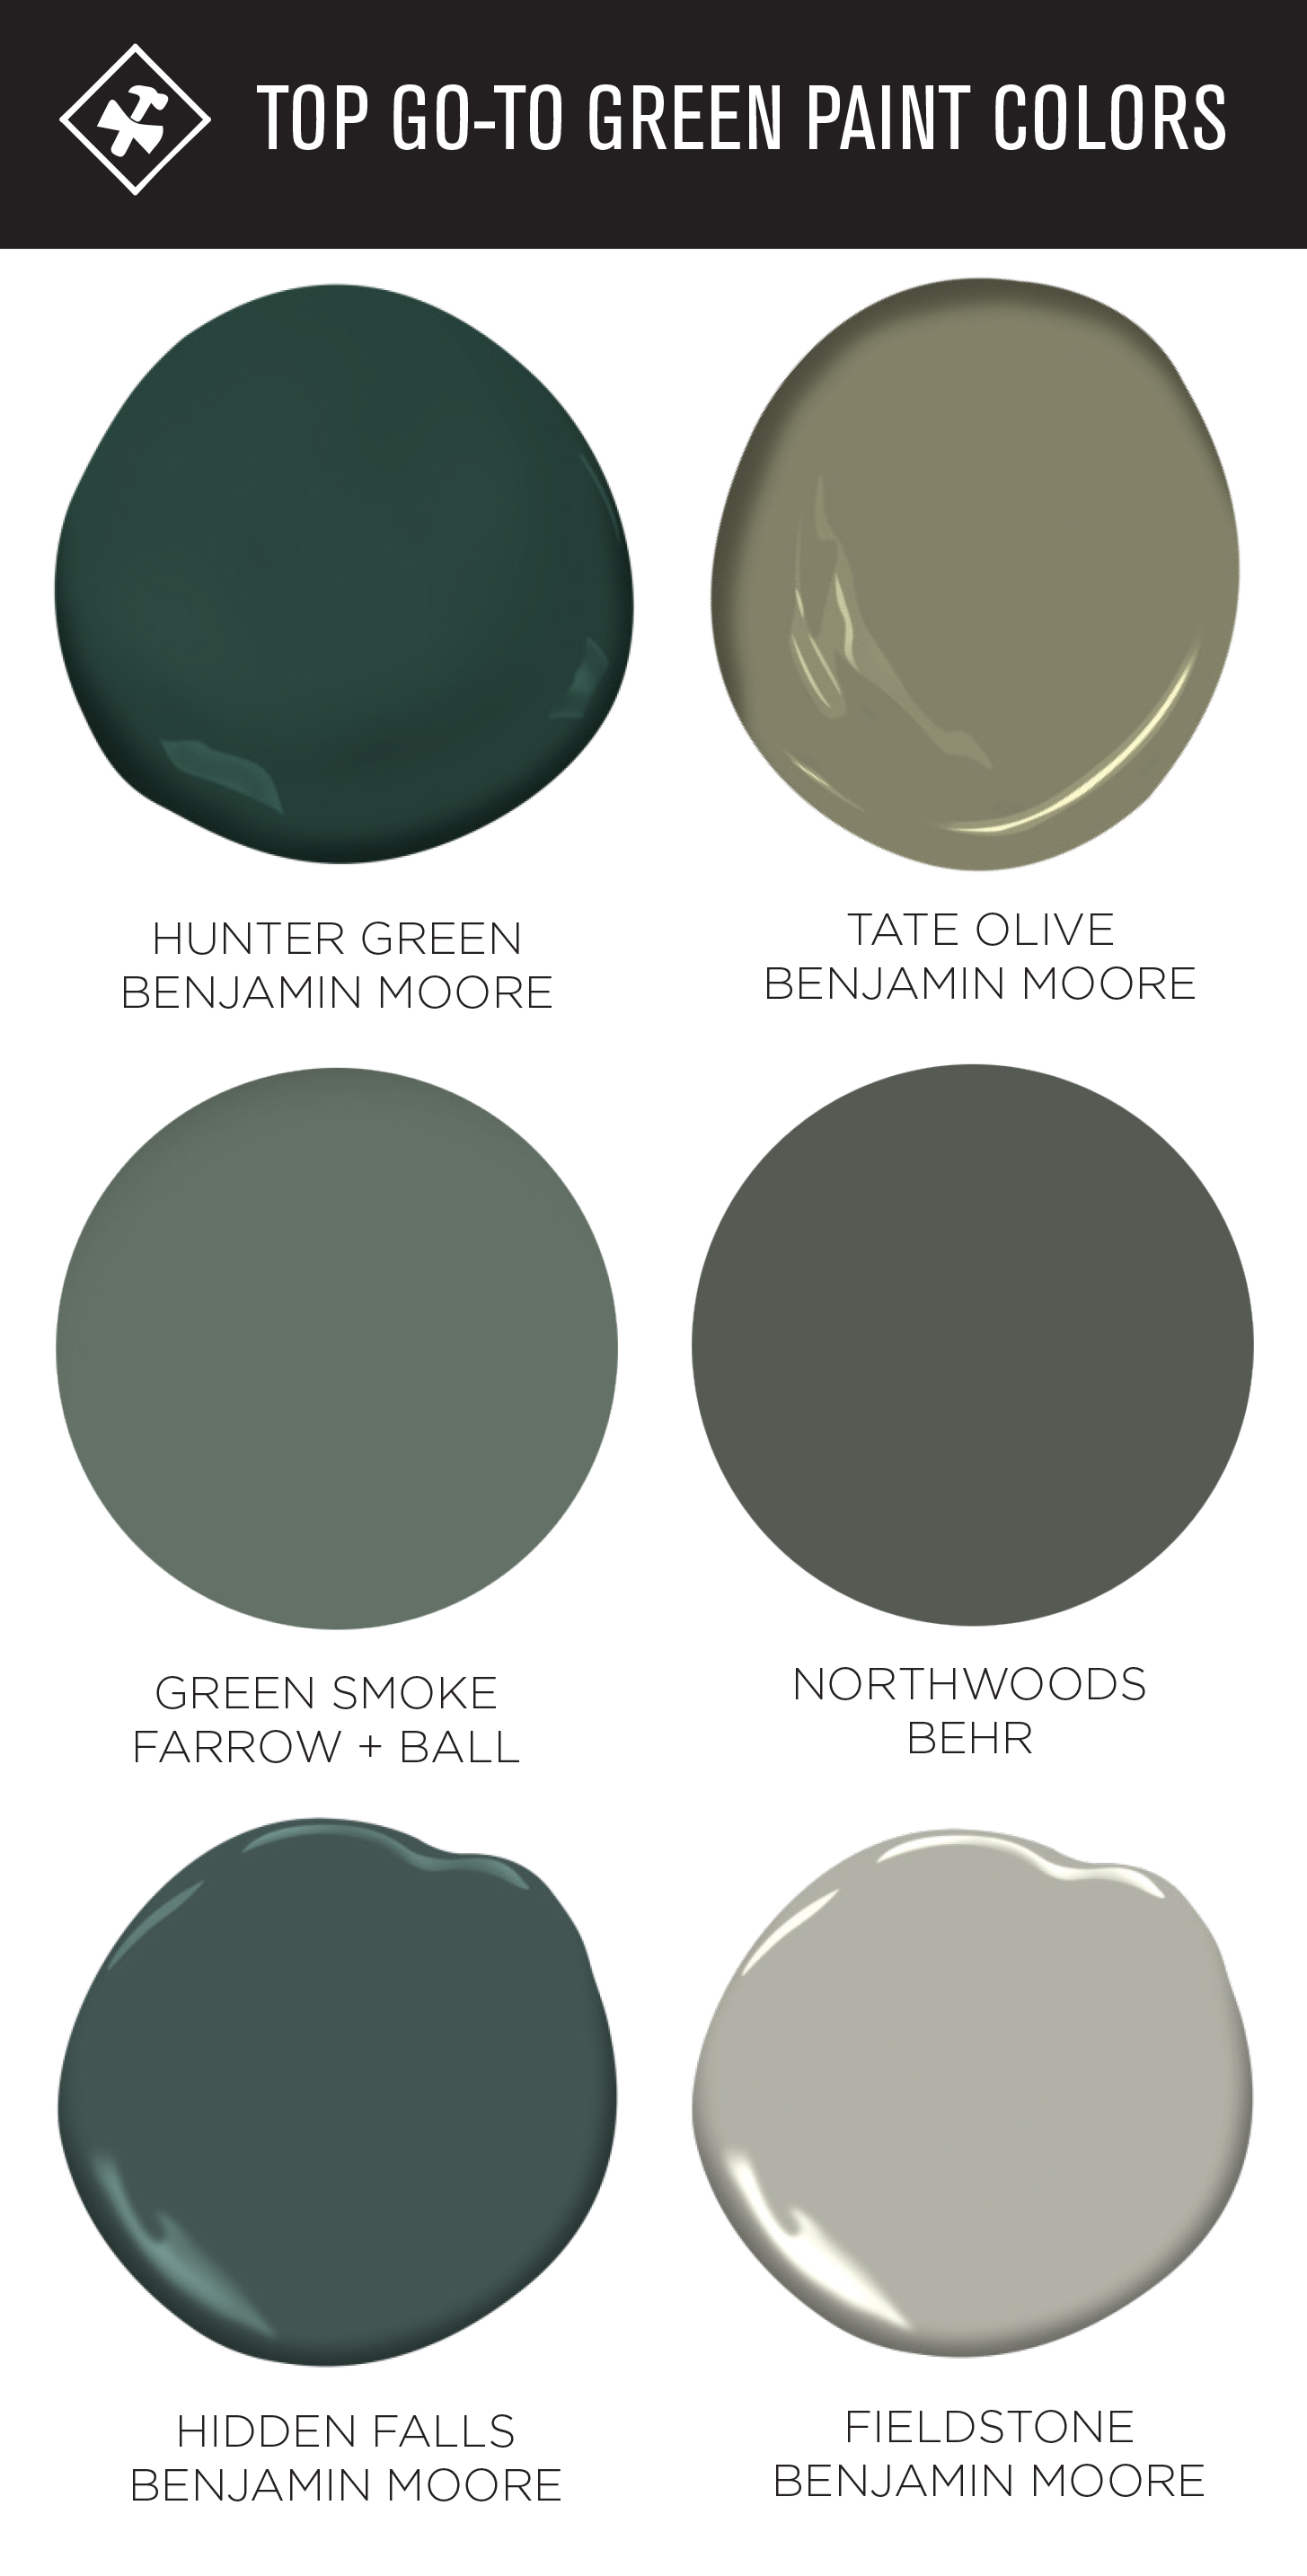 Green Paint Colors Our Go To S Construction2style,Baby Shower Decorations Ideas Girl